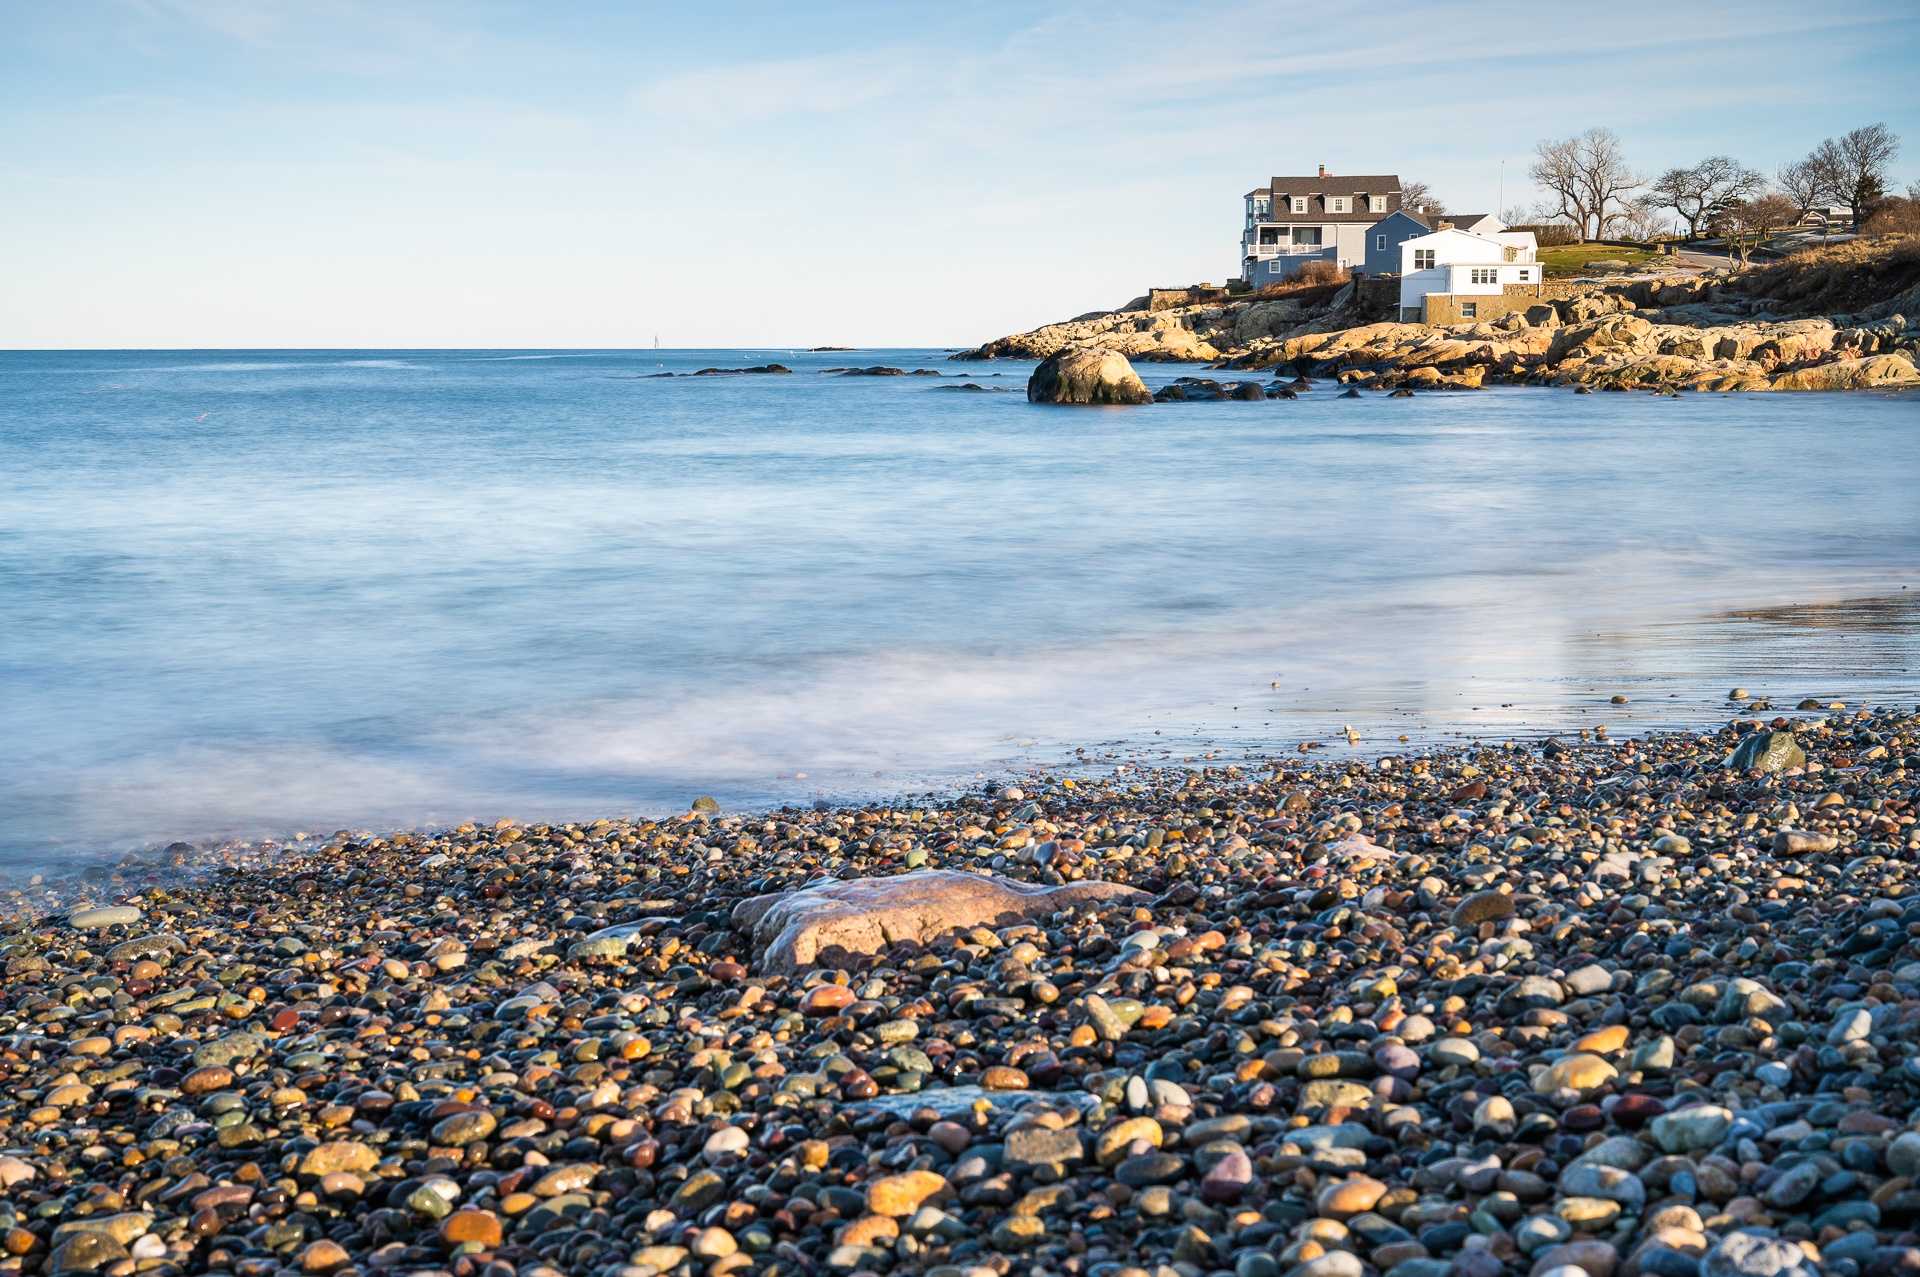 A photo of Black Rock Beach with Minot's Ledge Light seen in the distance